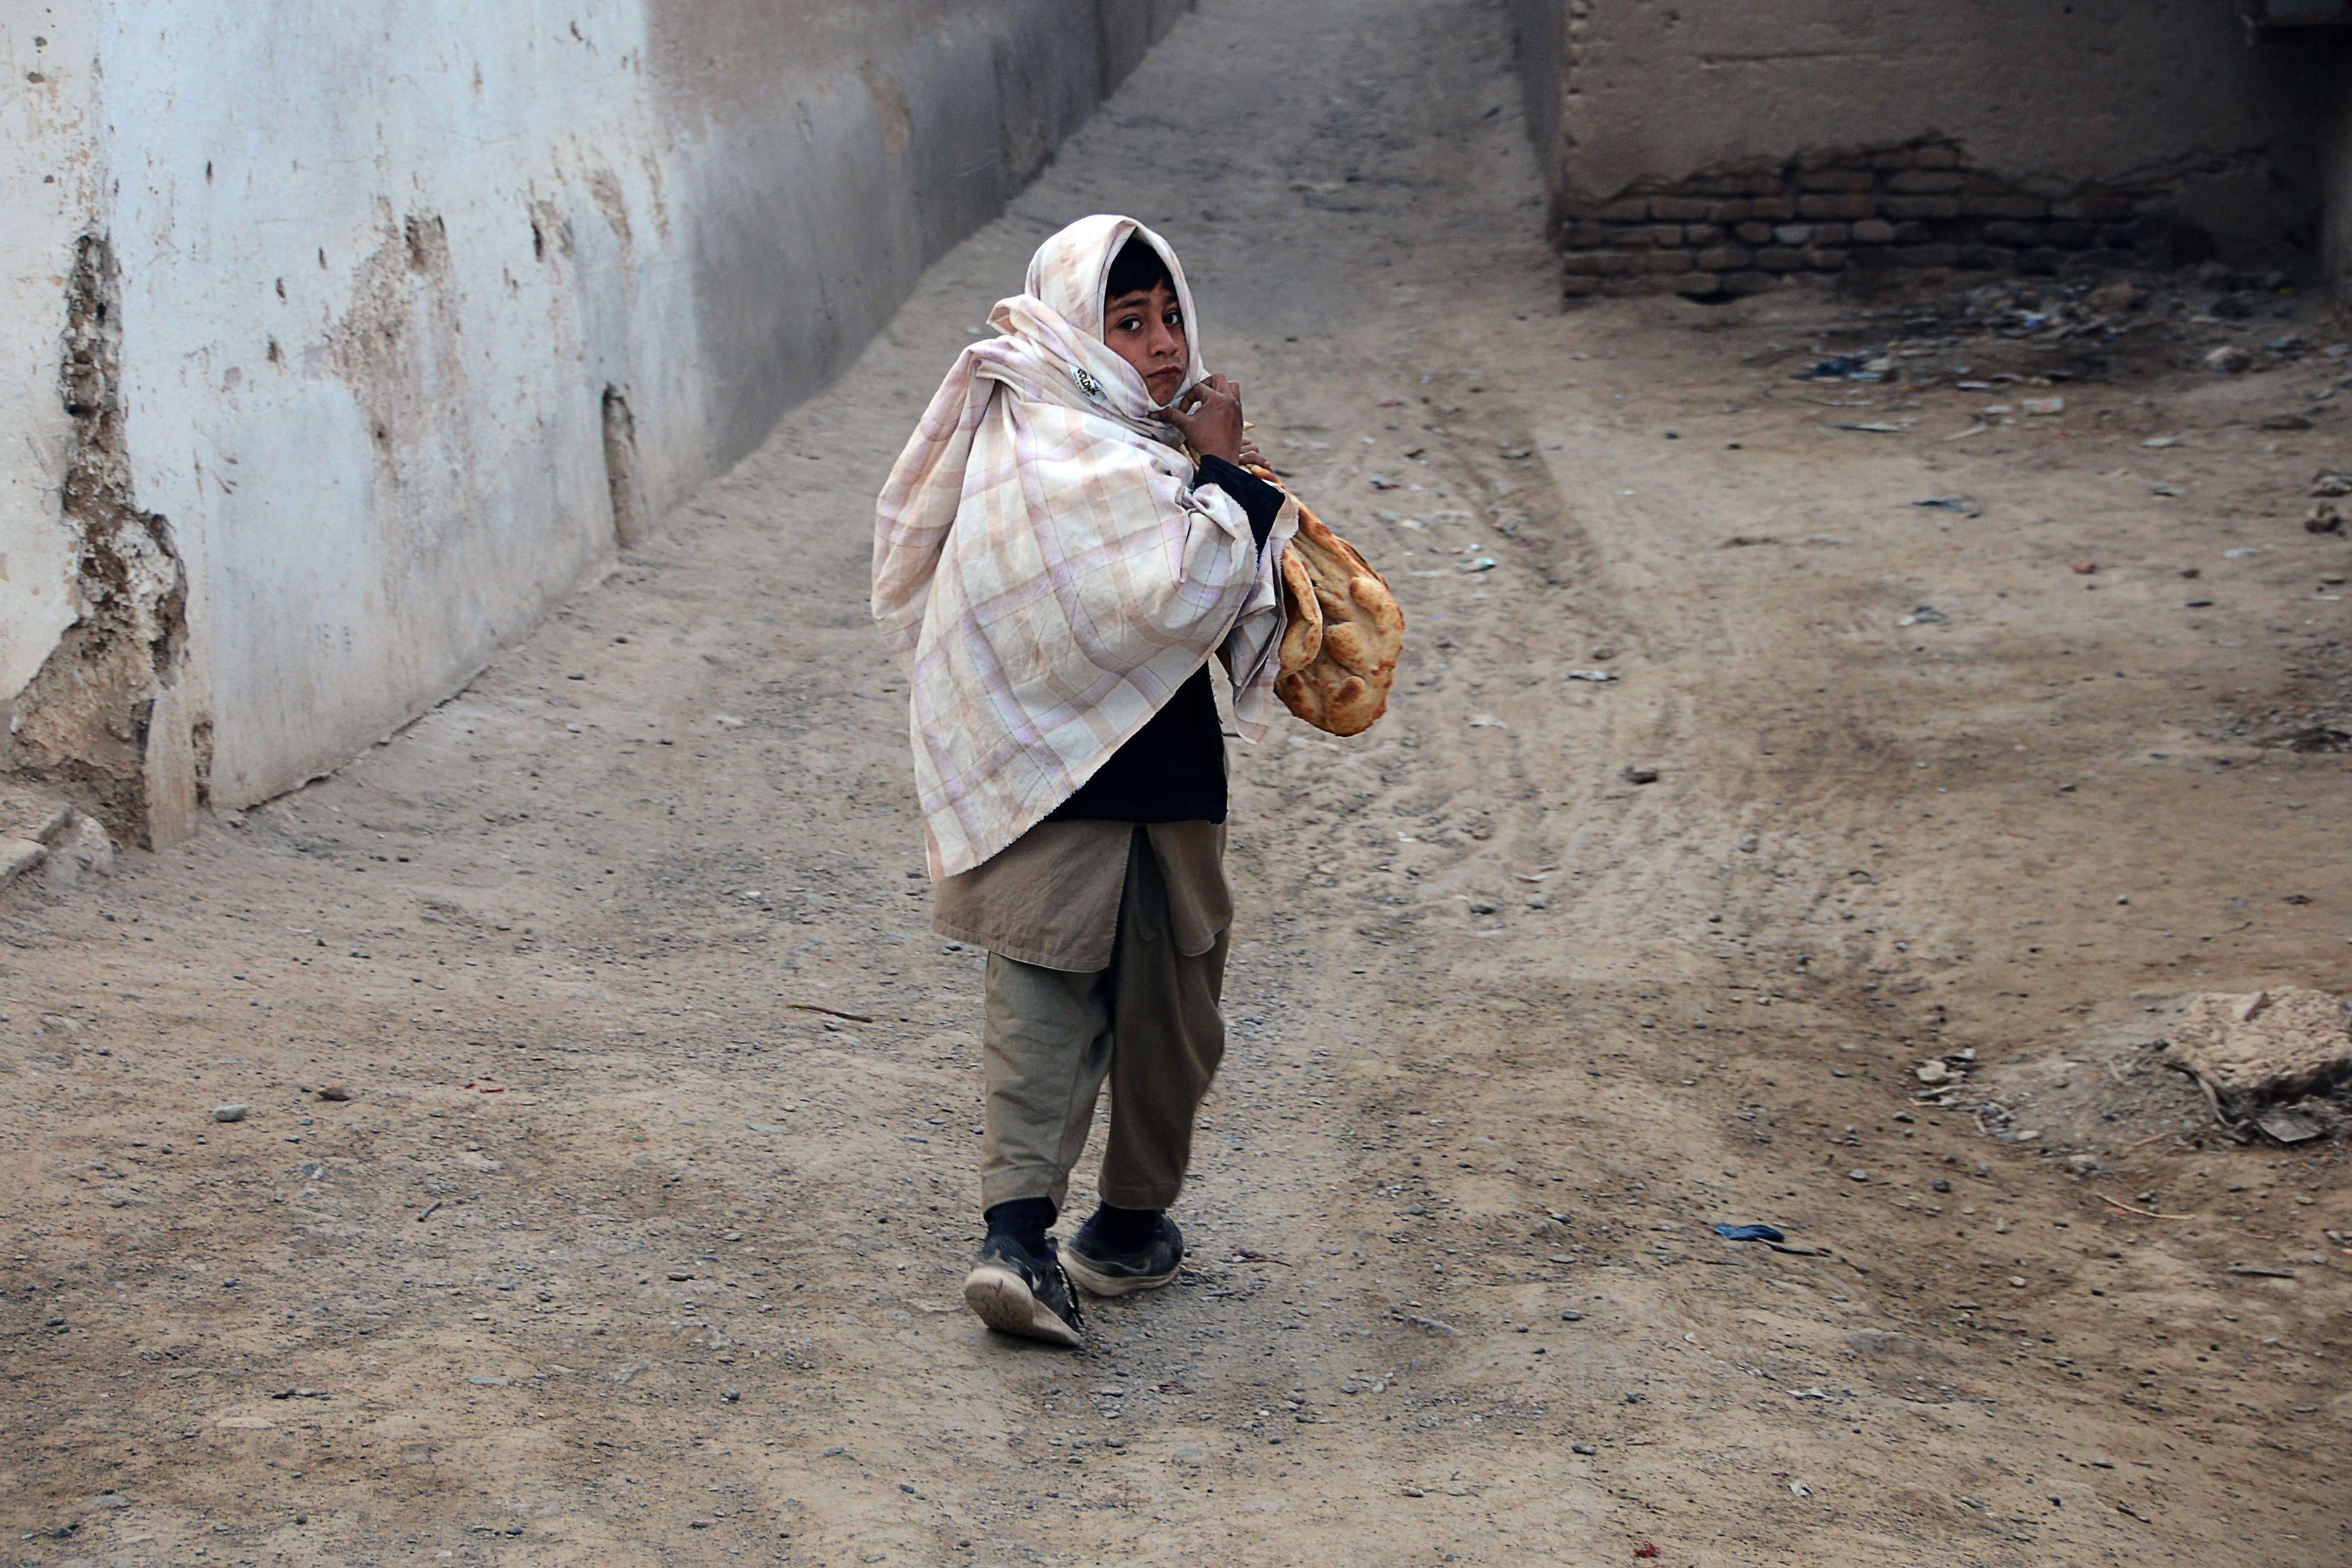 A child holding bread walks early in the morning in Kandahar, Afghanistan on February 5, 2022.